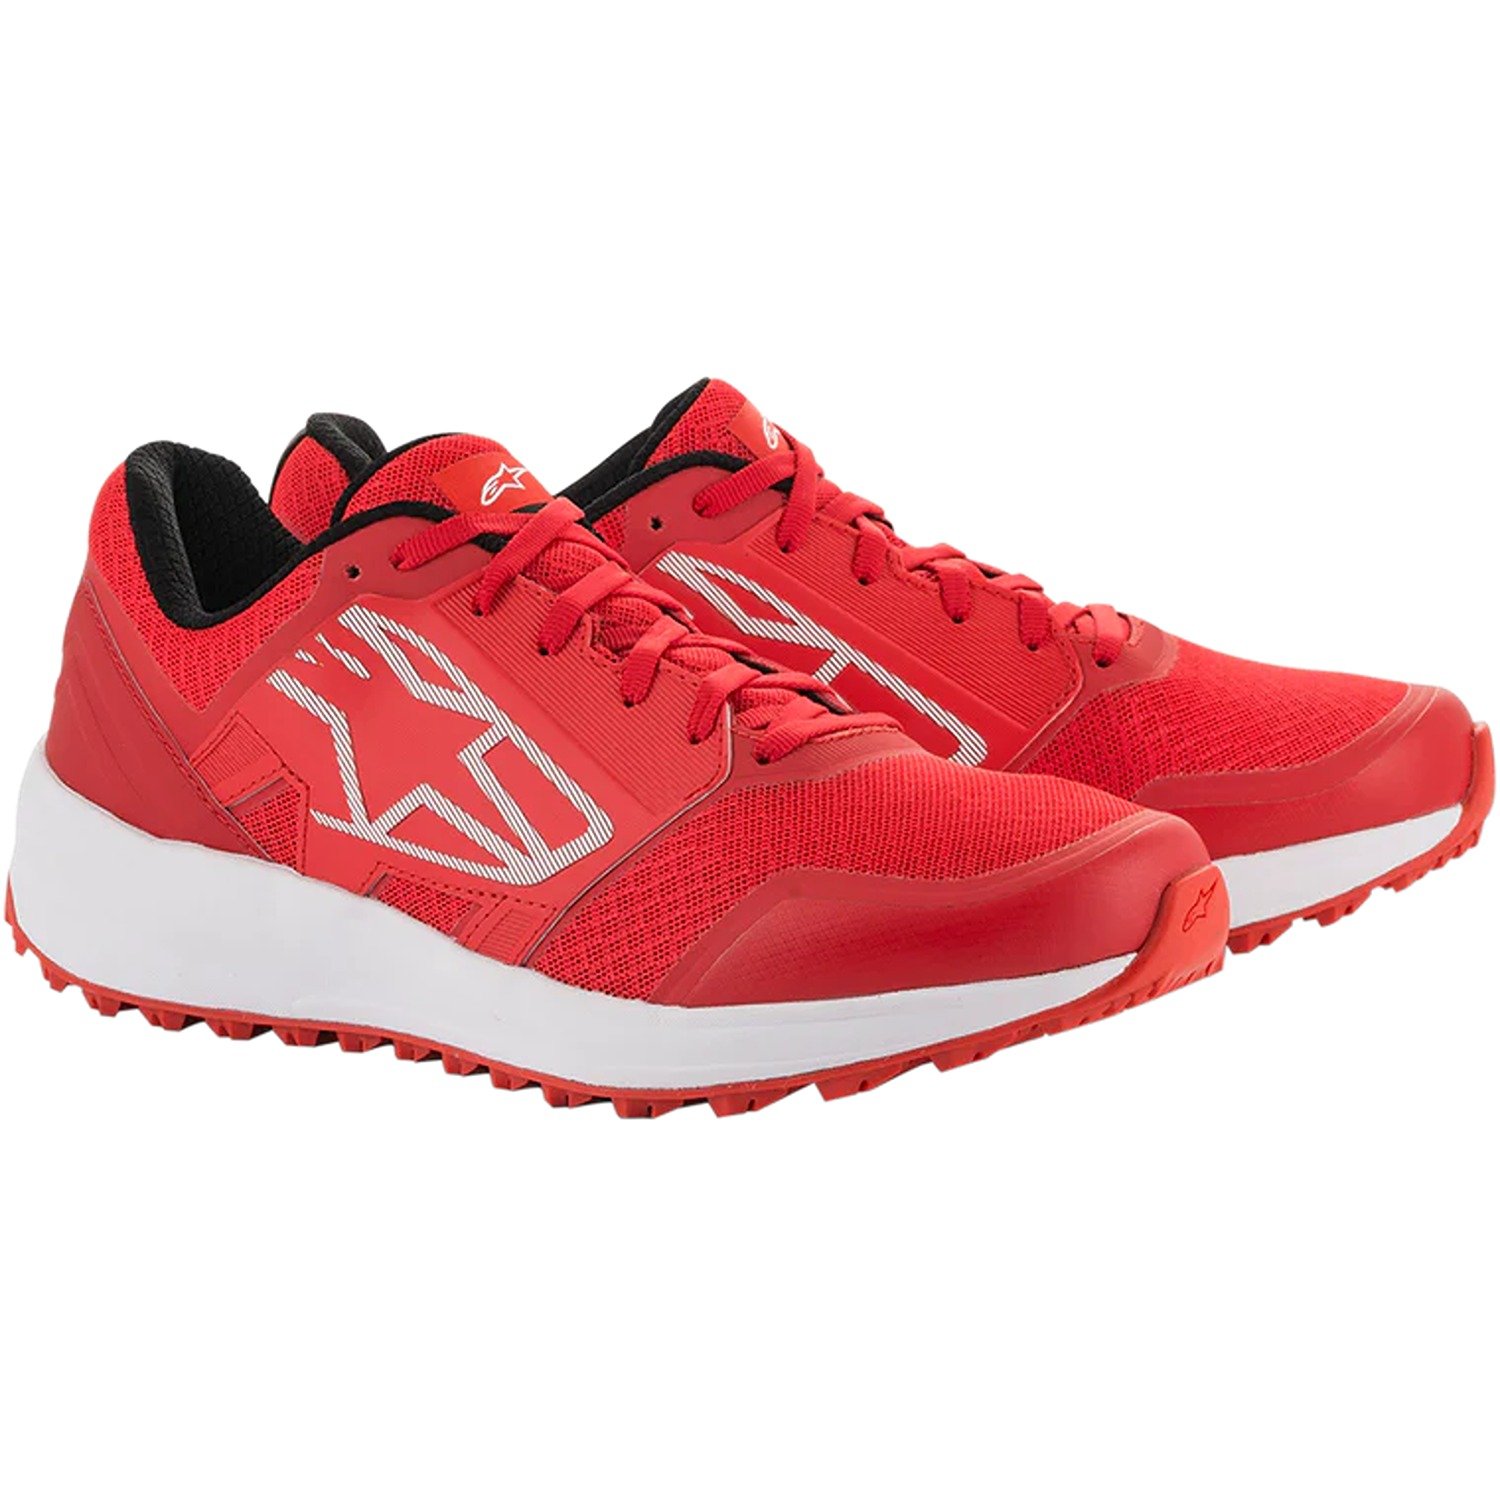 Image of Alpinestars Meta Trail Shoes Red White Size US 4 ID 8059175107634